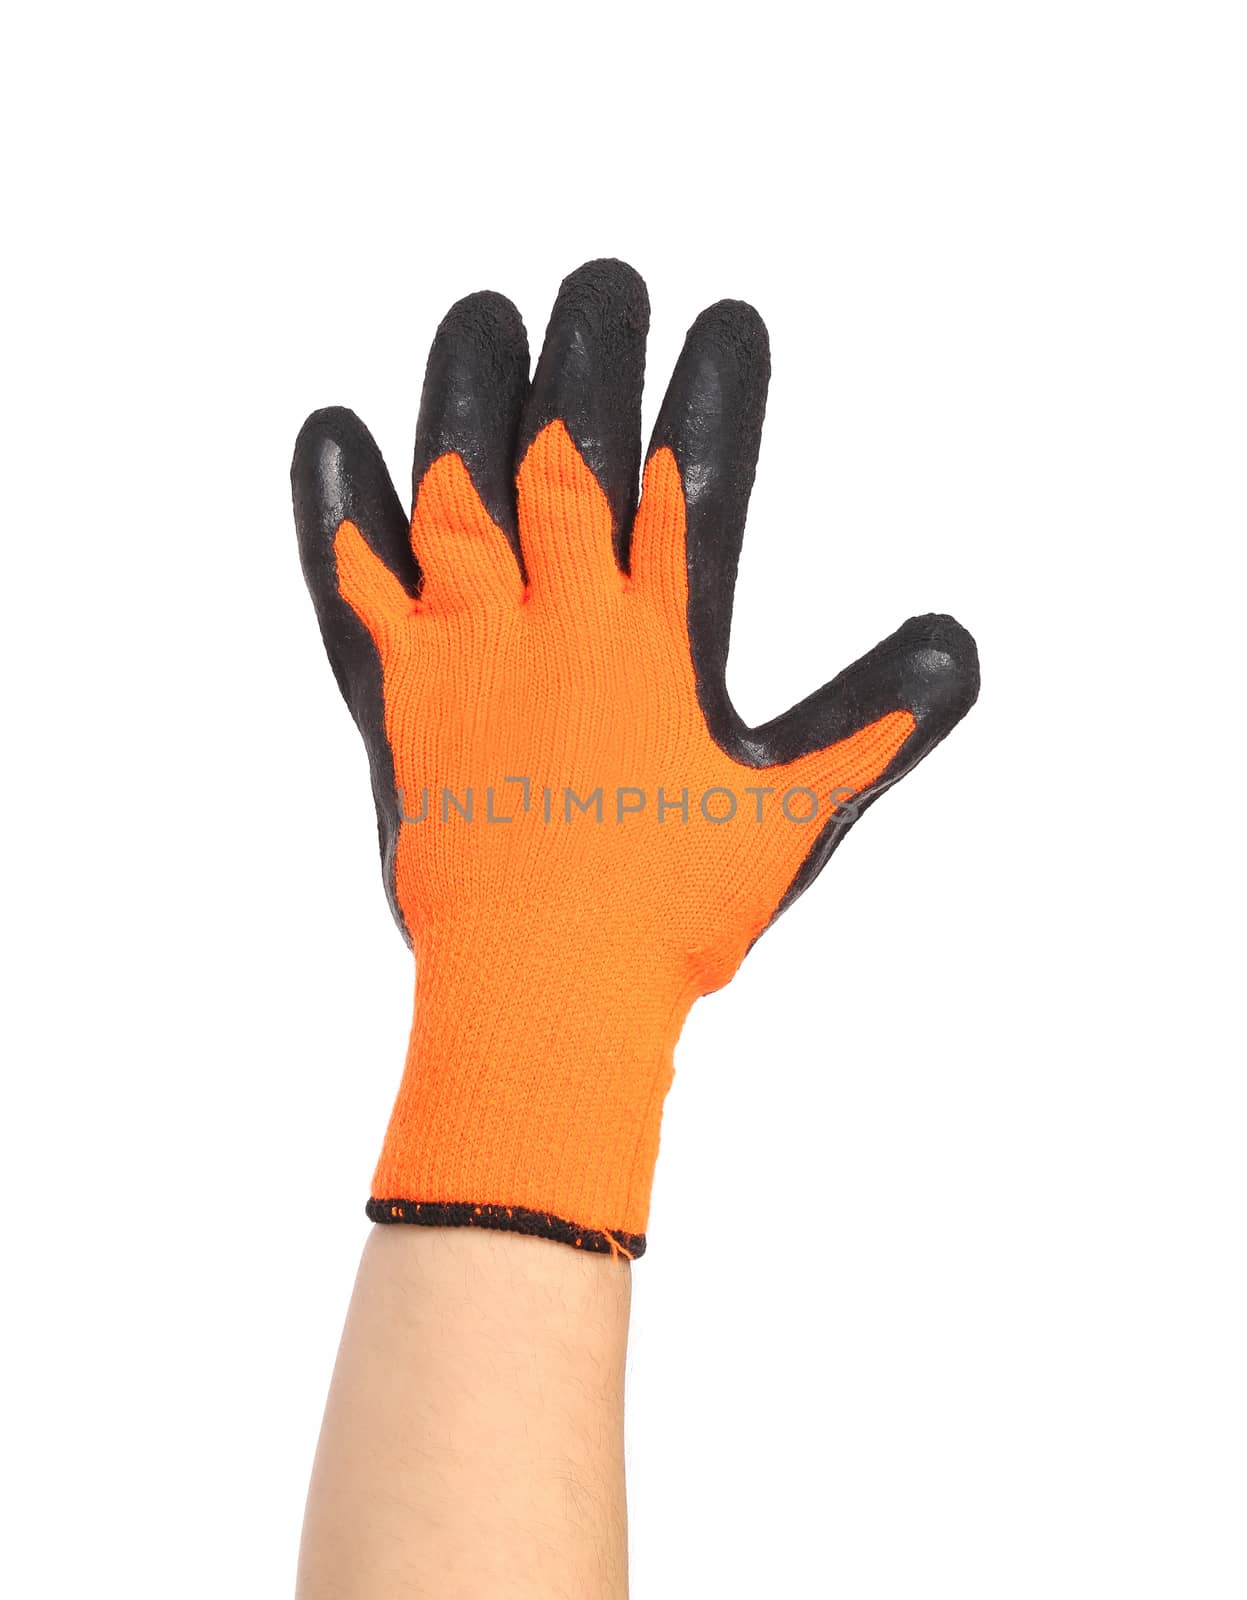 Hand in rubber glove shows five. Isolated on a white background.